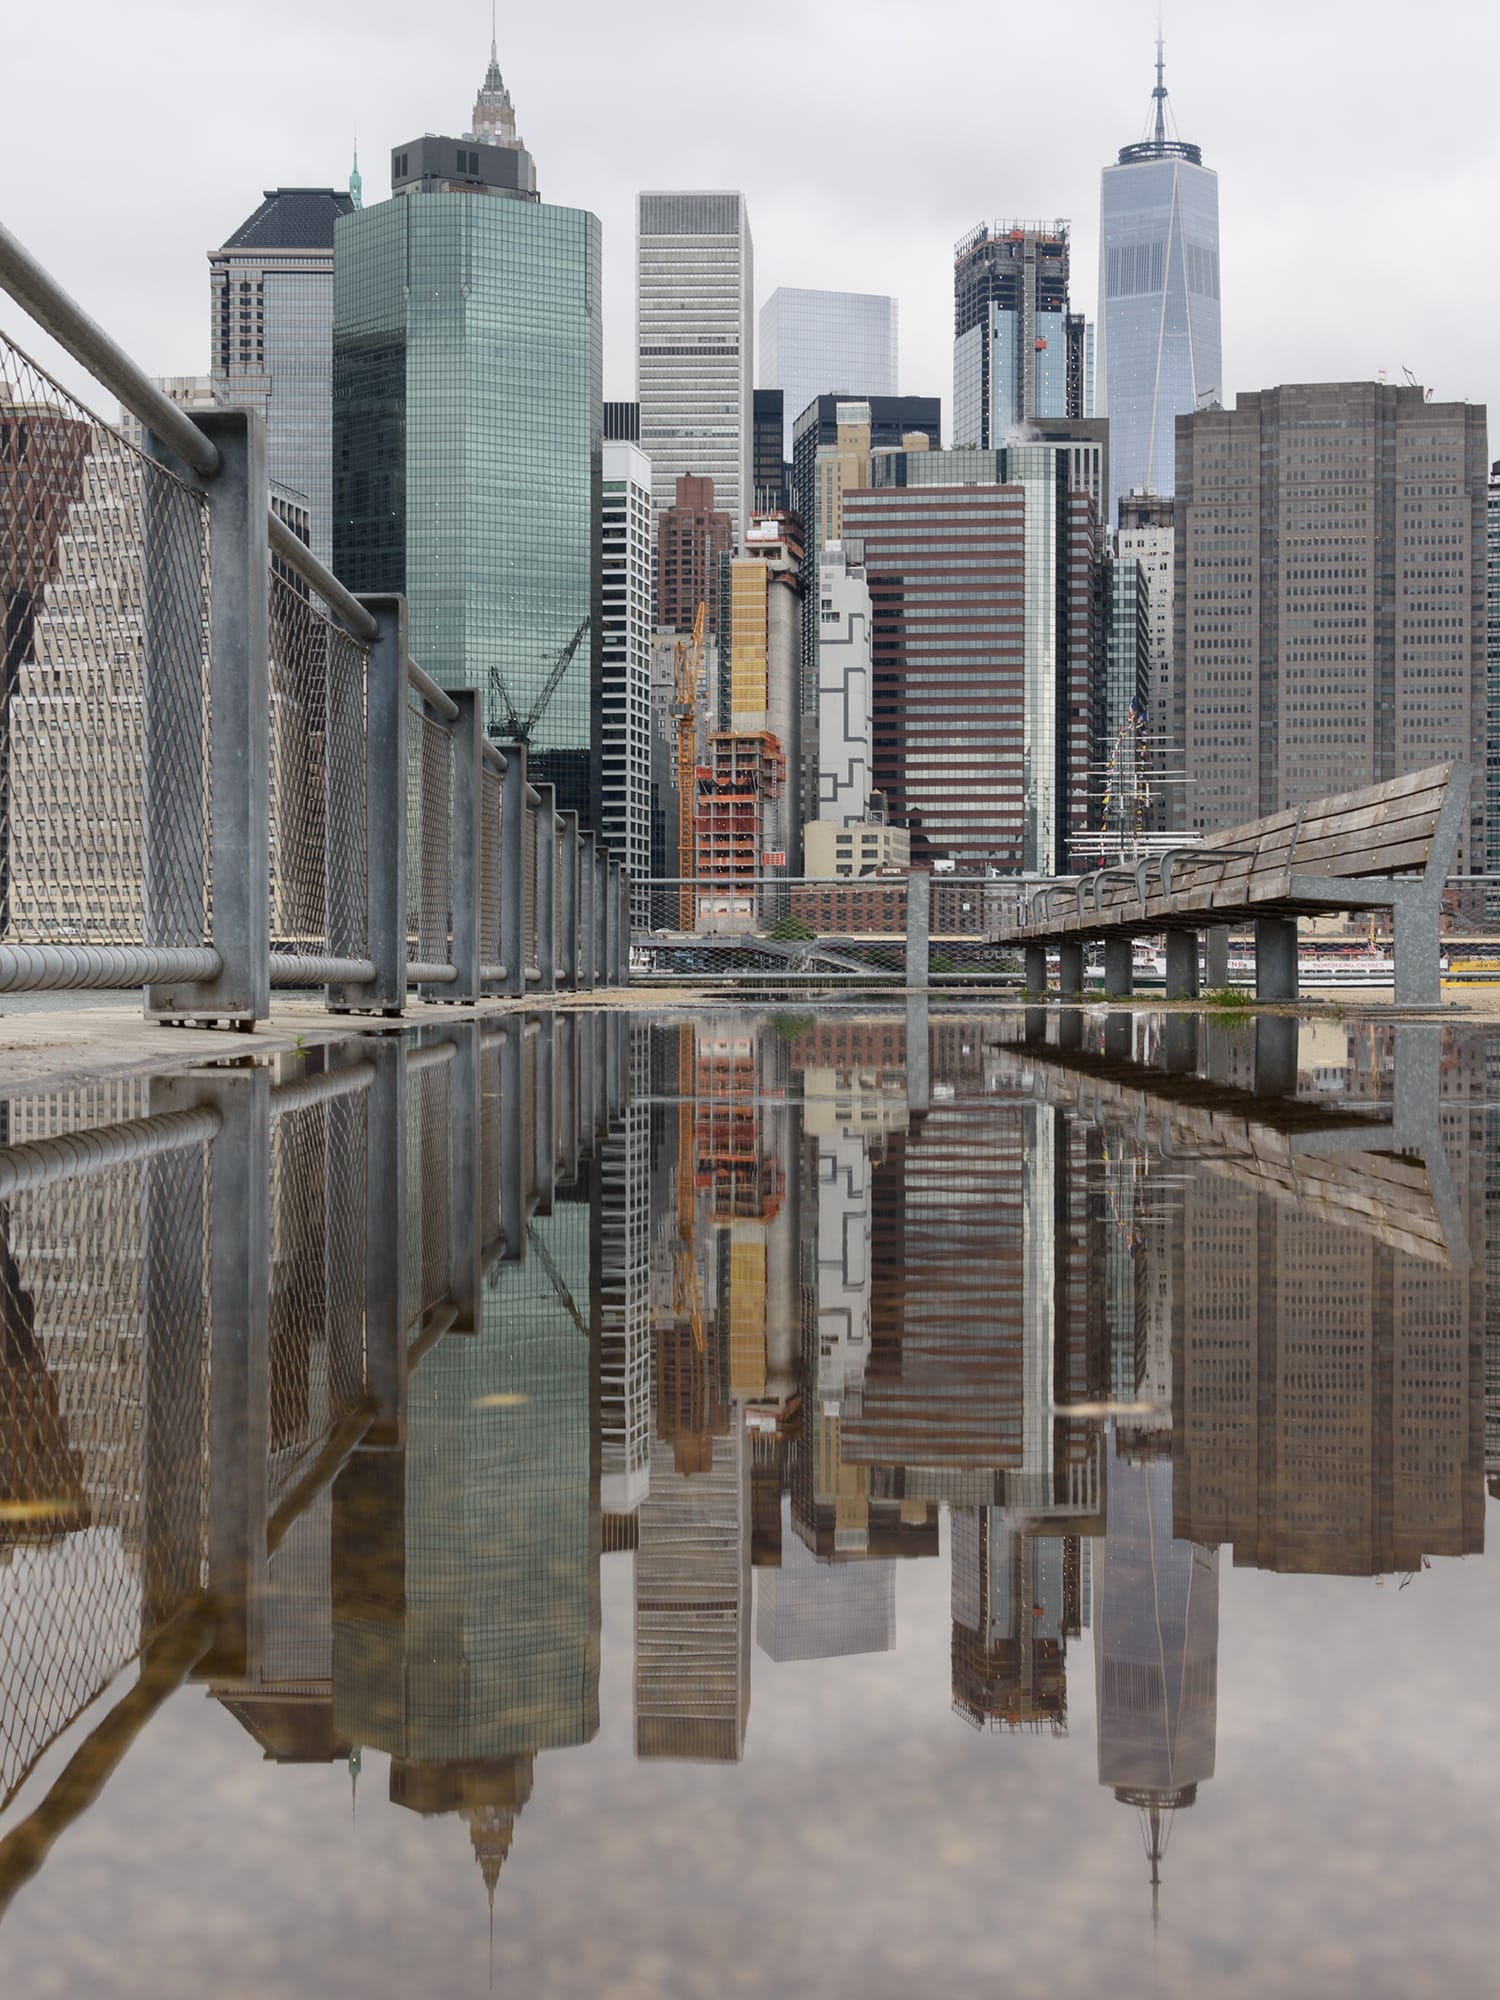 8 Great Tips and Tricks for Taking Awesome Puddle Photos